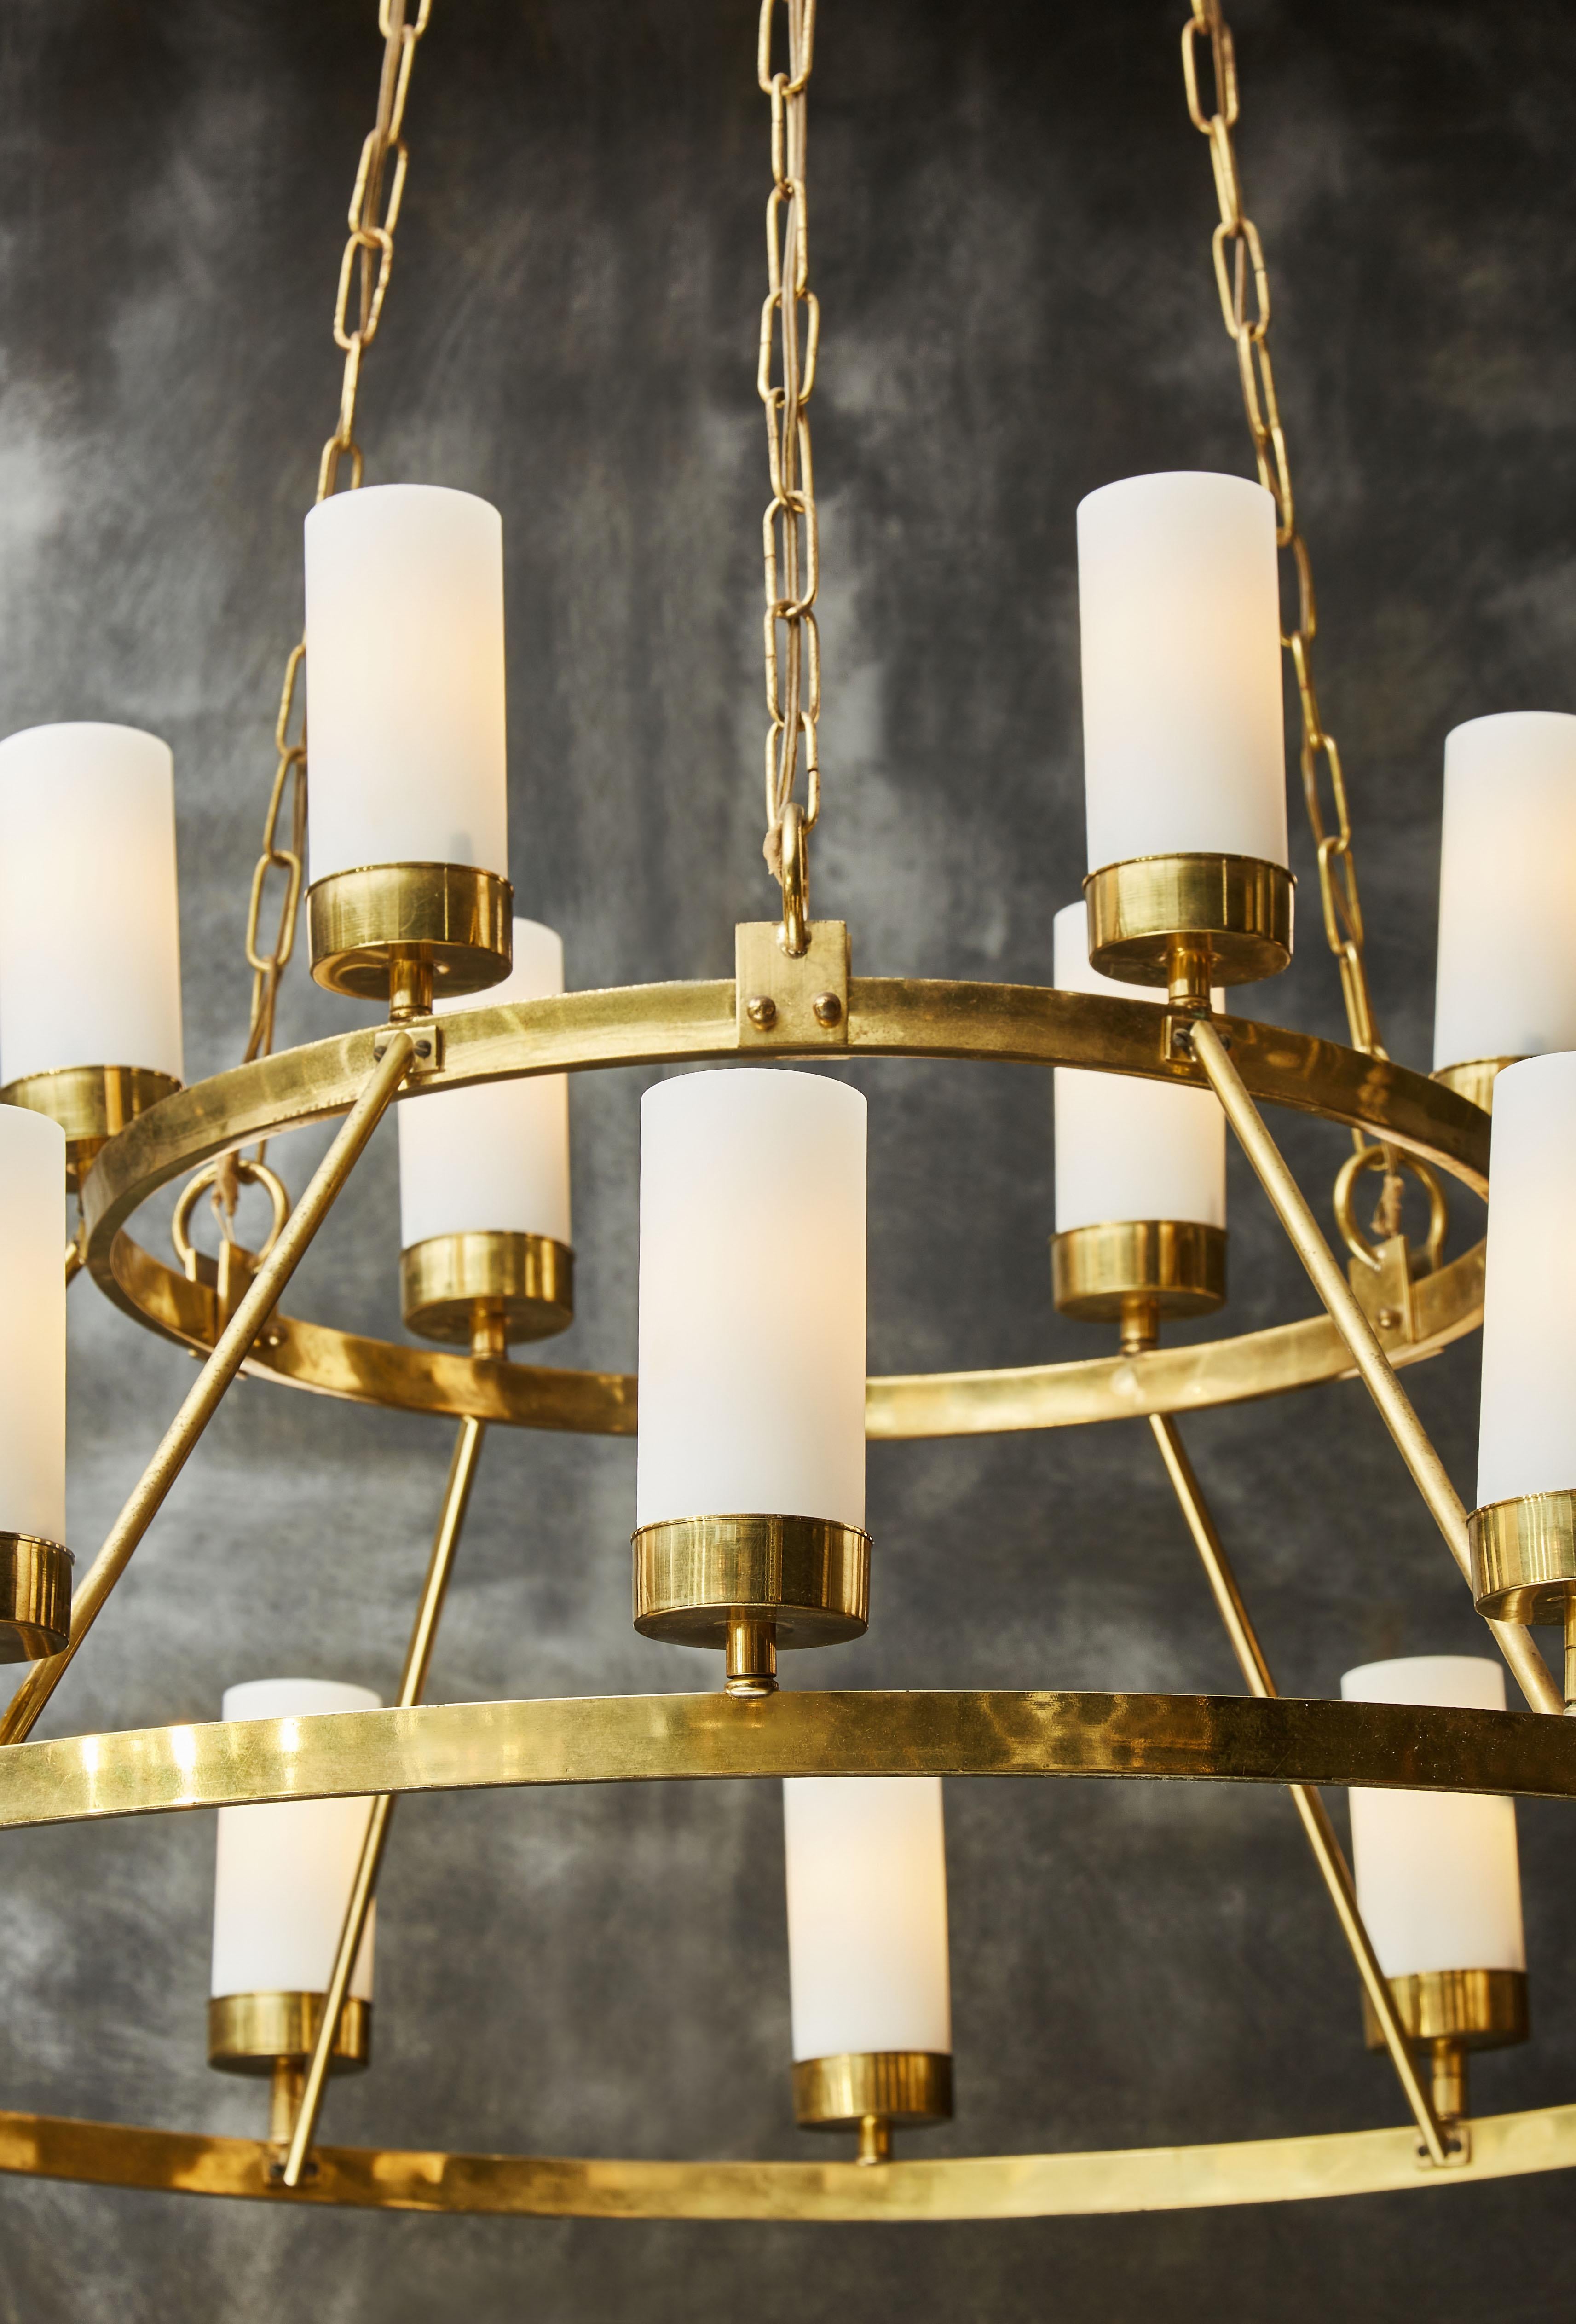 Mid-20th Century Brass Circular Chandelier with Eighteen Lights Hanged by Chains For Sale